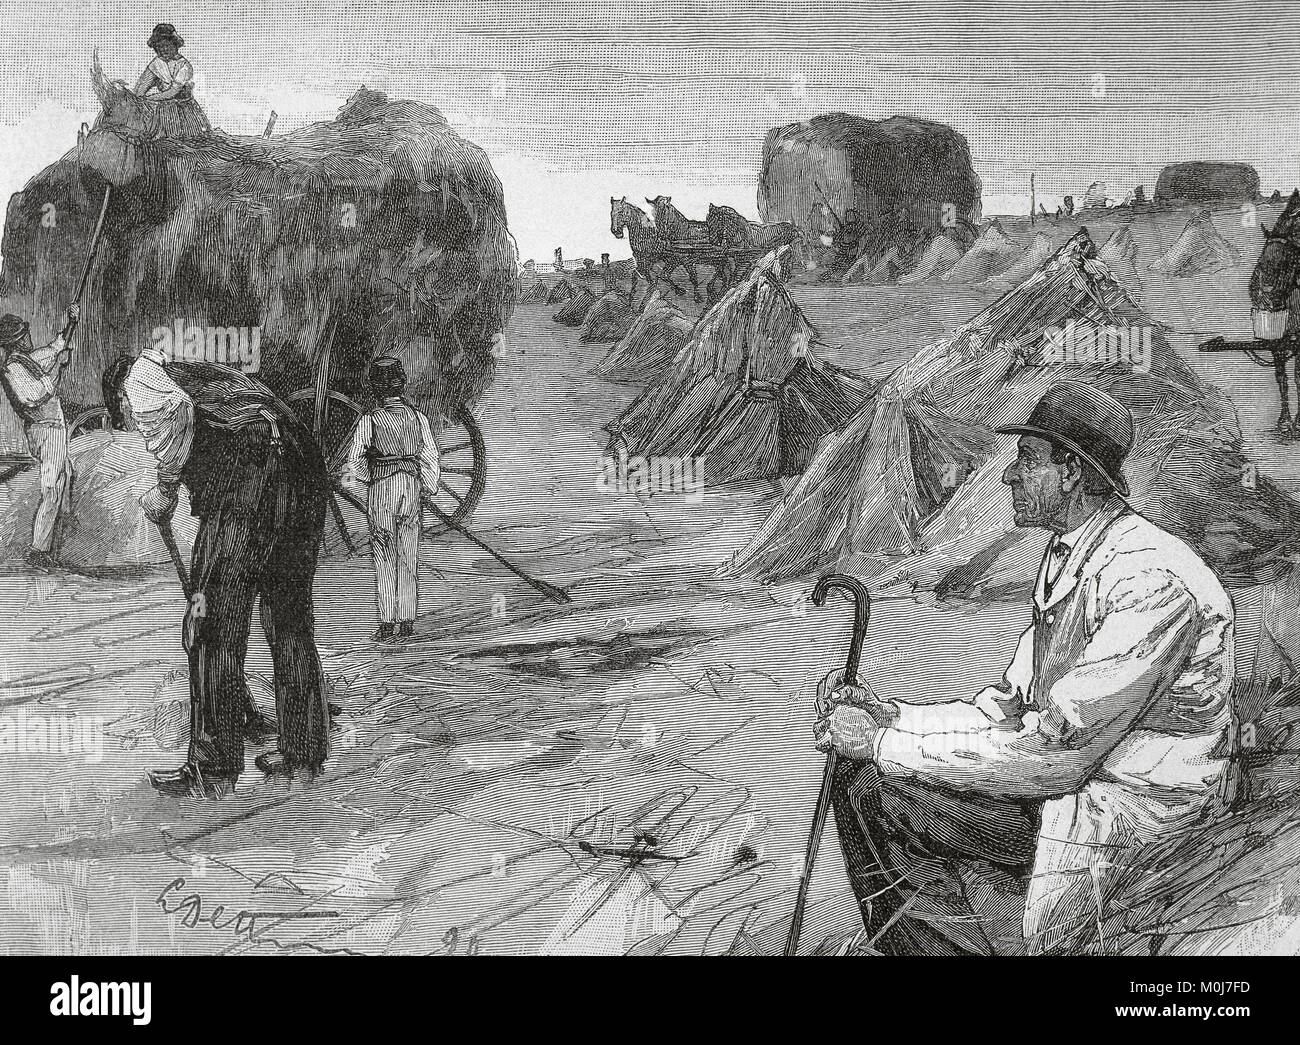 Farmer observing the farmers who work their lands. Engraving Stock Photo